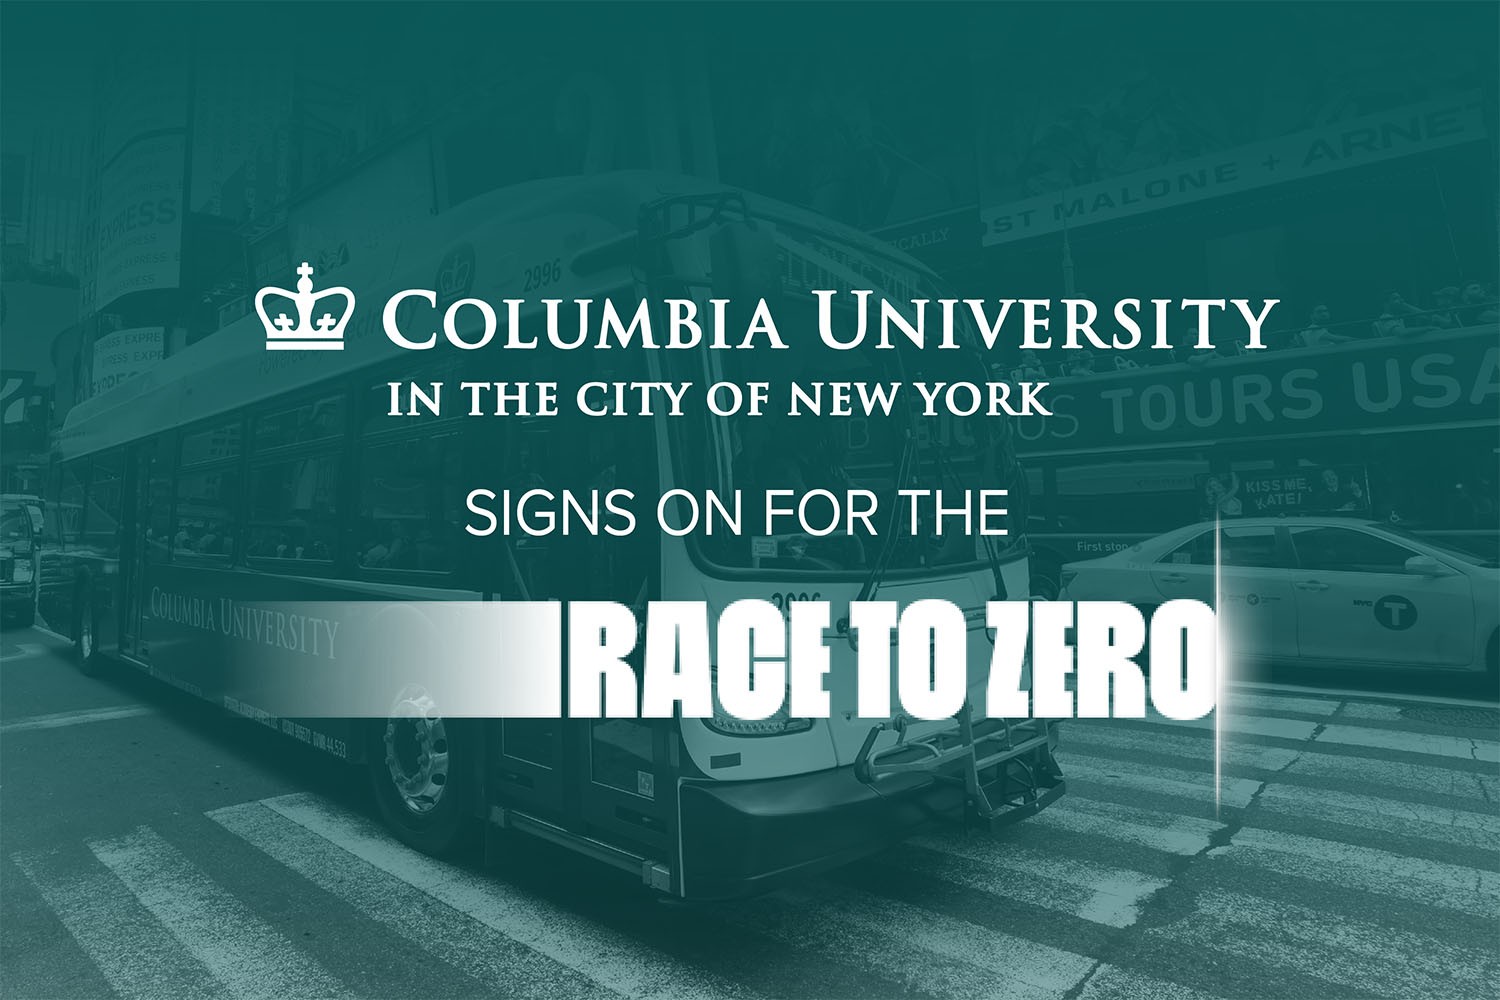 Columbia University logo and Race to Zero logo on teal background with transparent image of electric bus